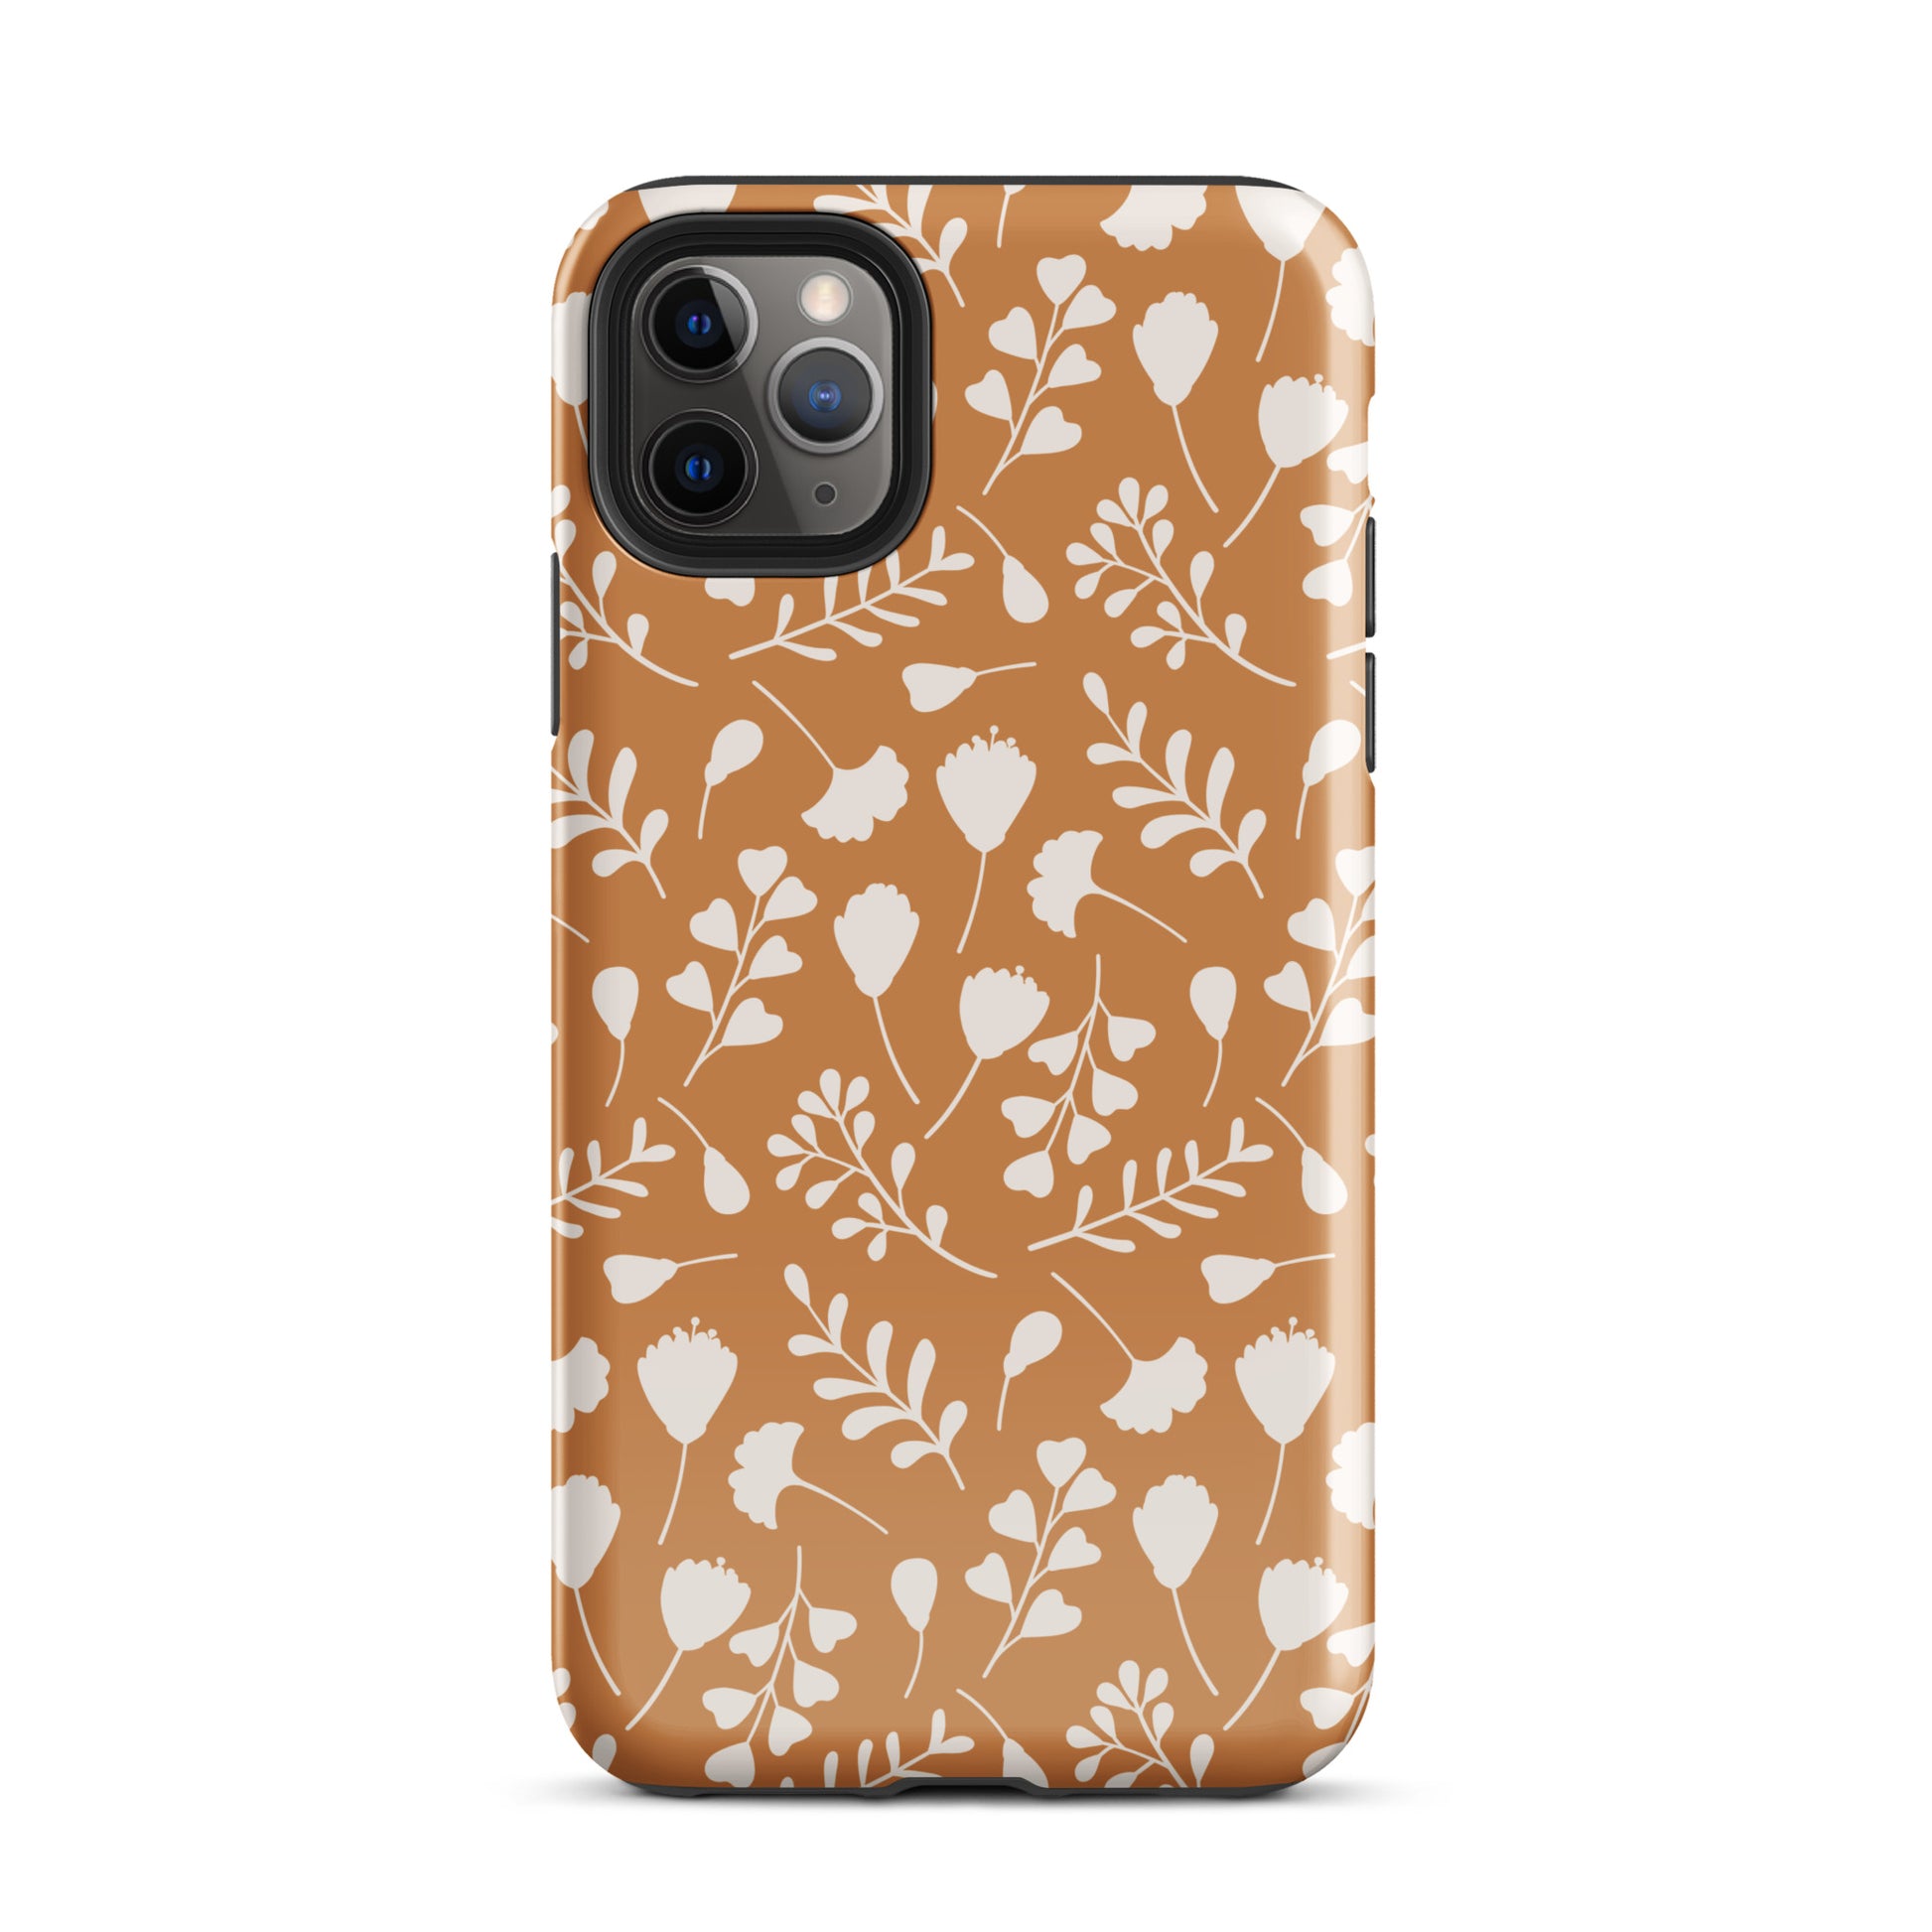 Autumn Bloom iPhone Case iPhone 11 Pro Max Glossy